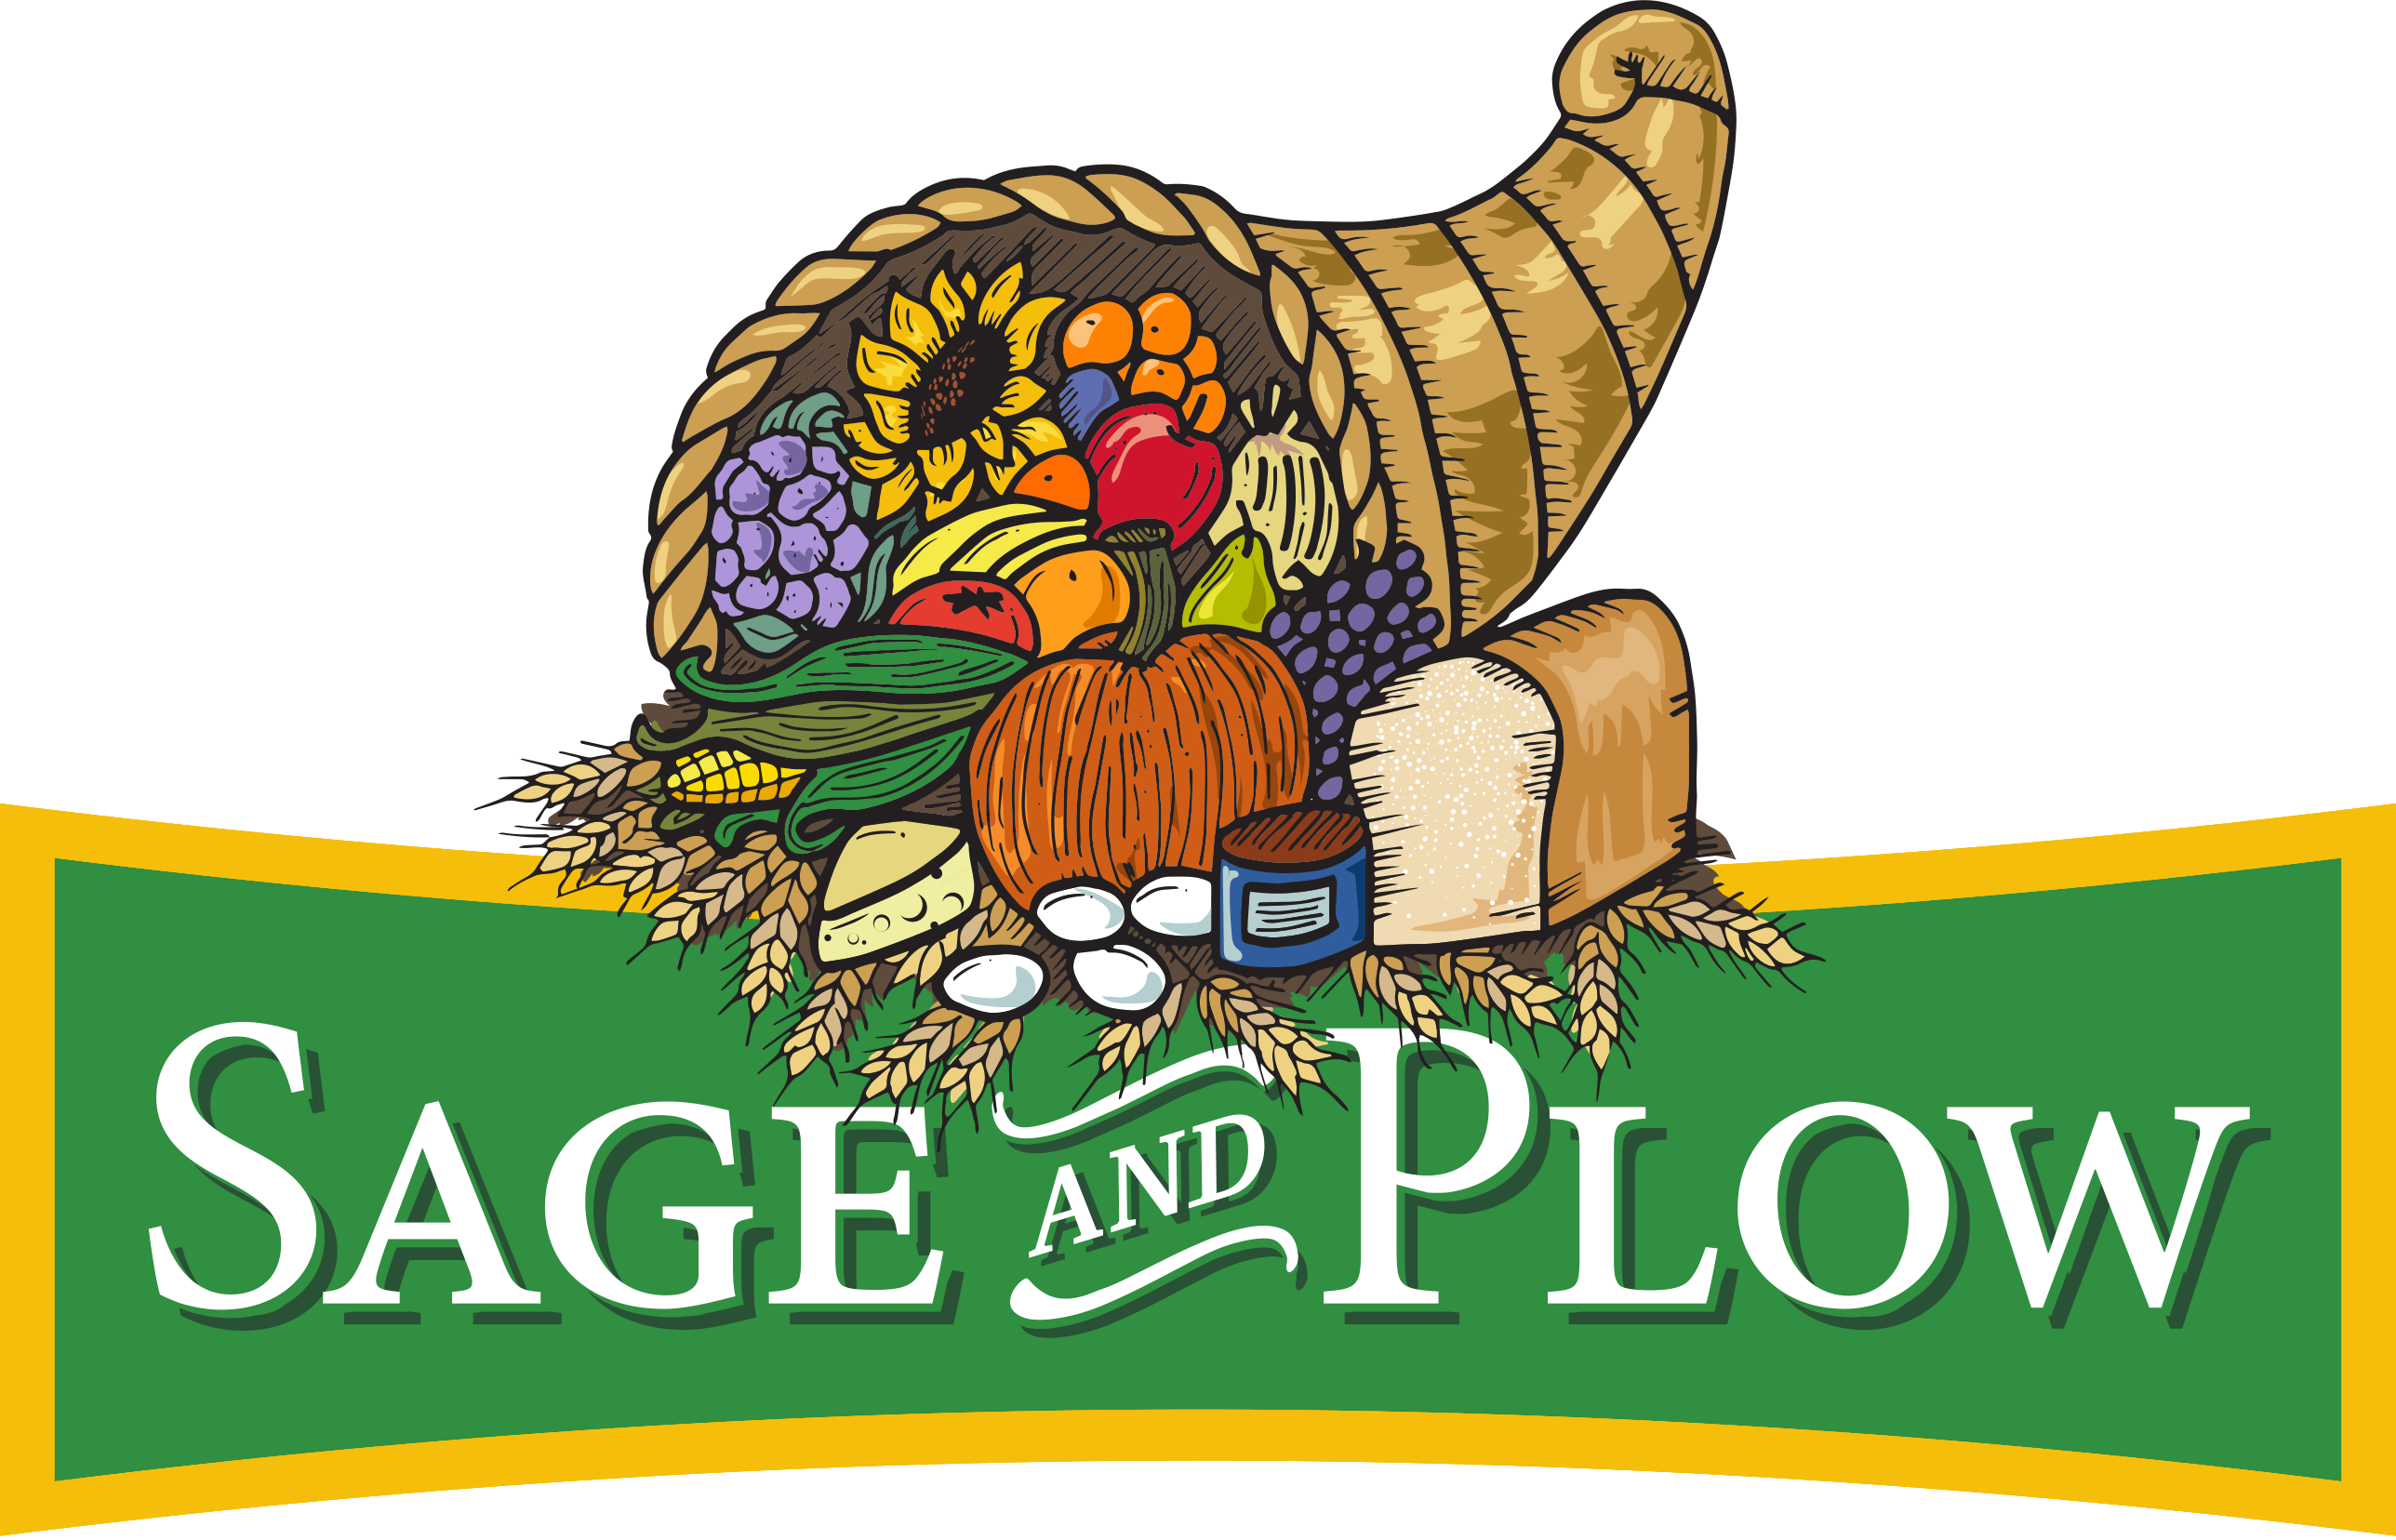 Sage and Plow